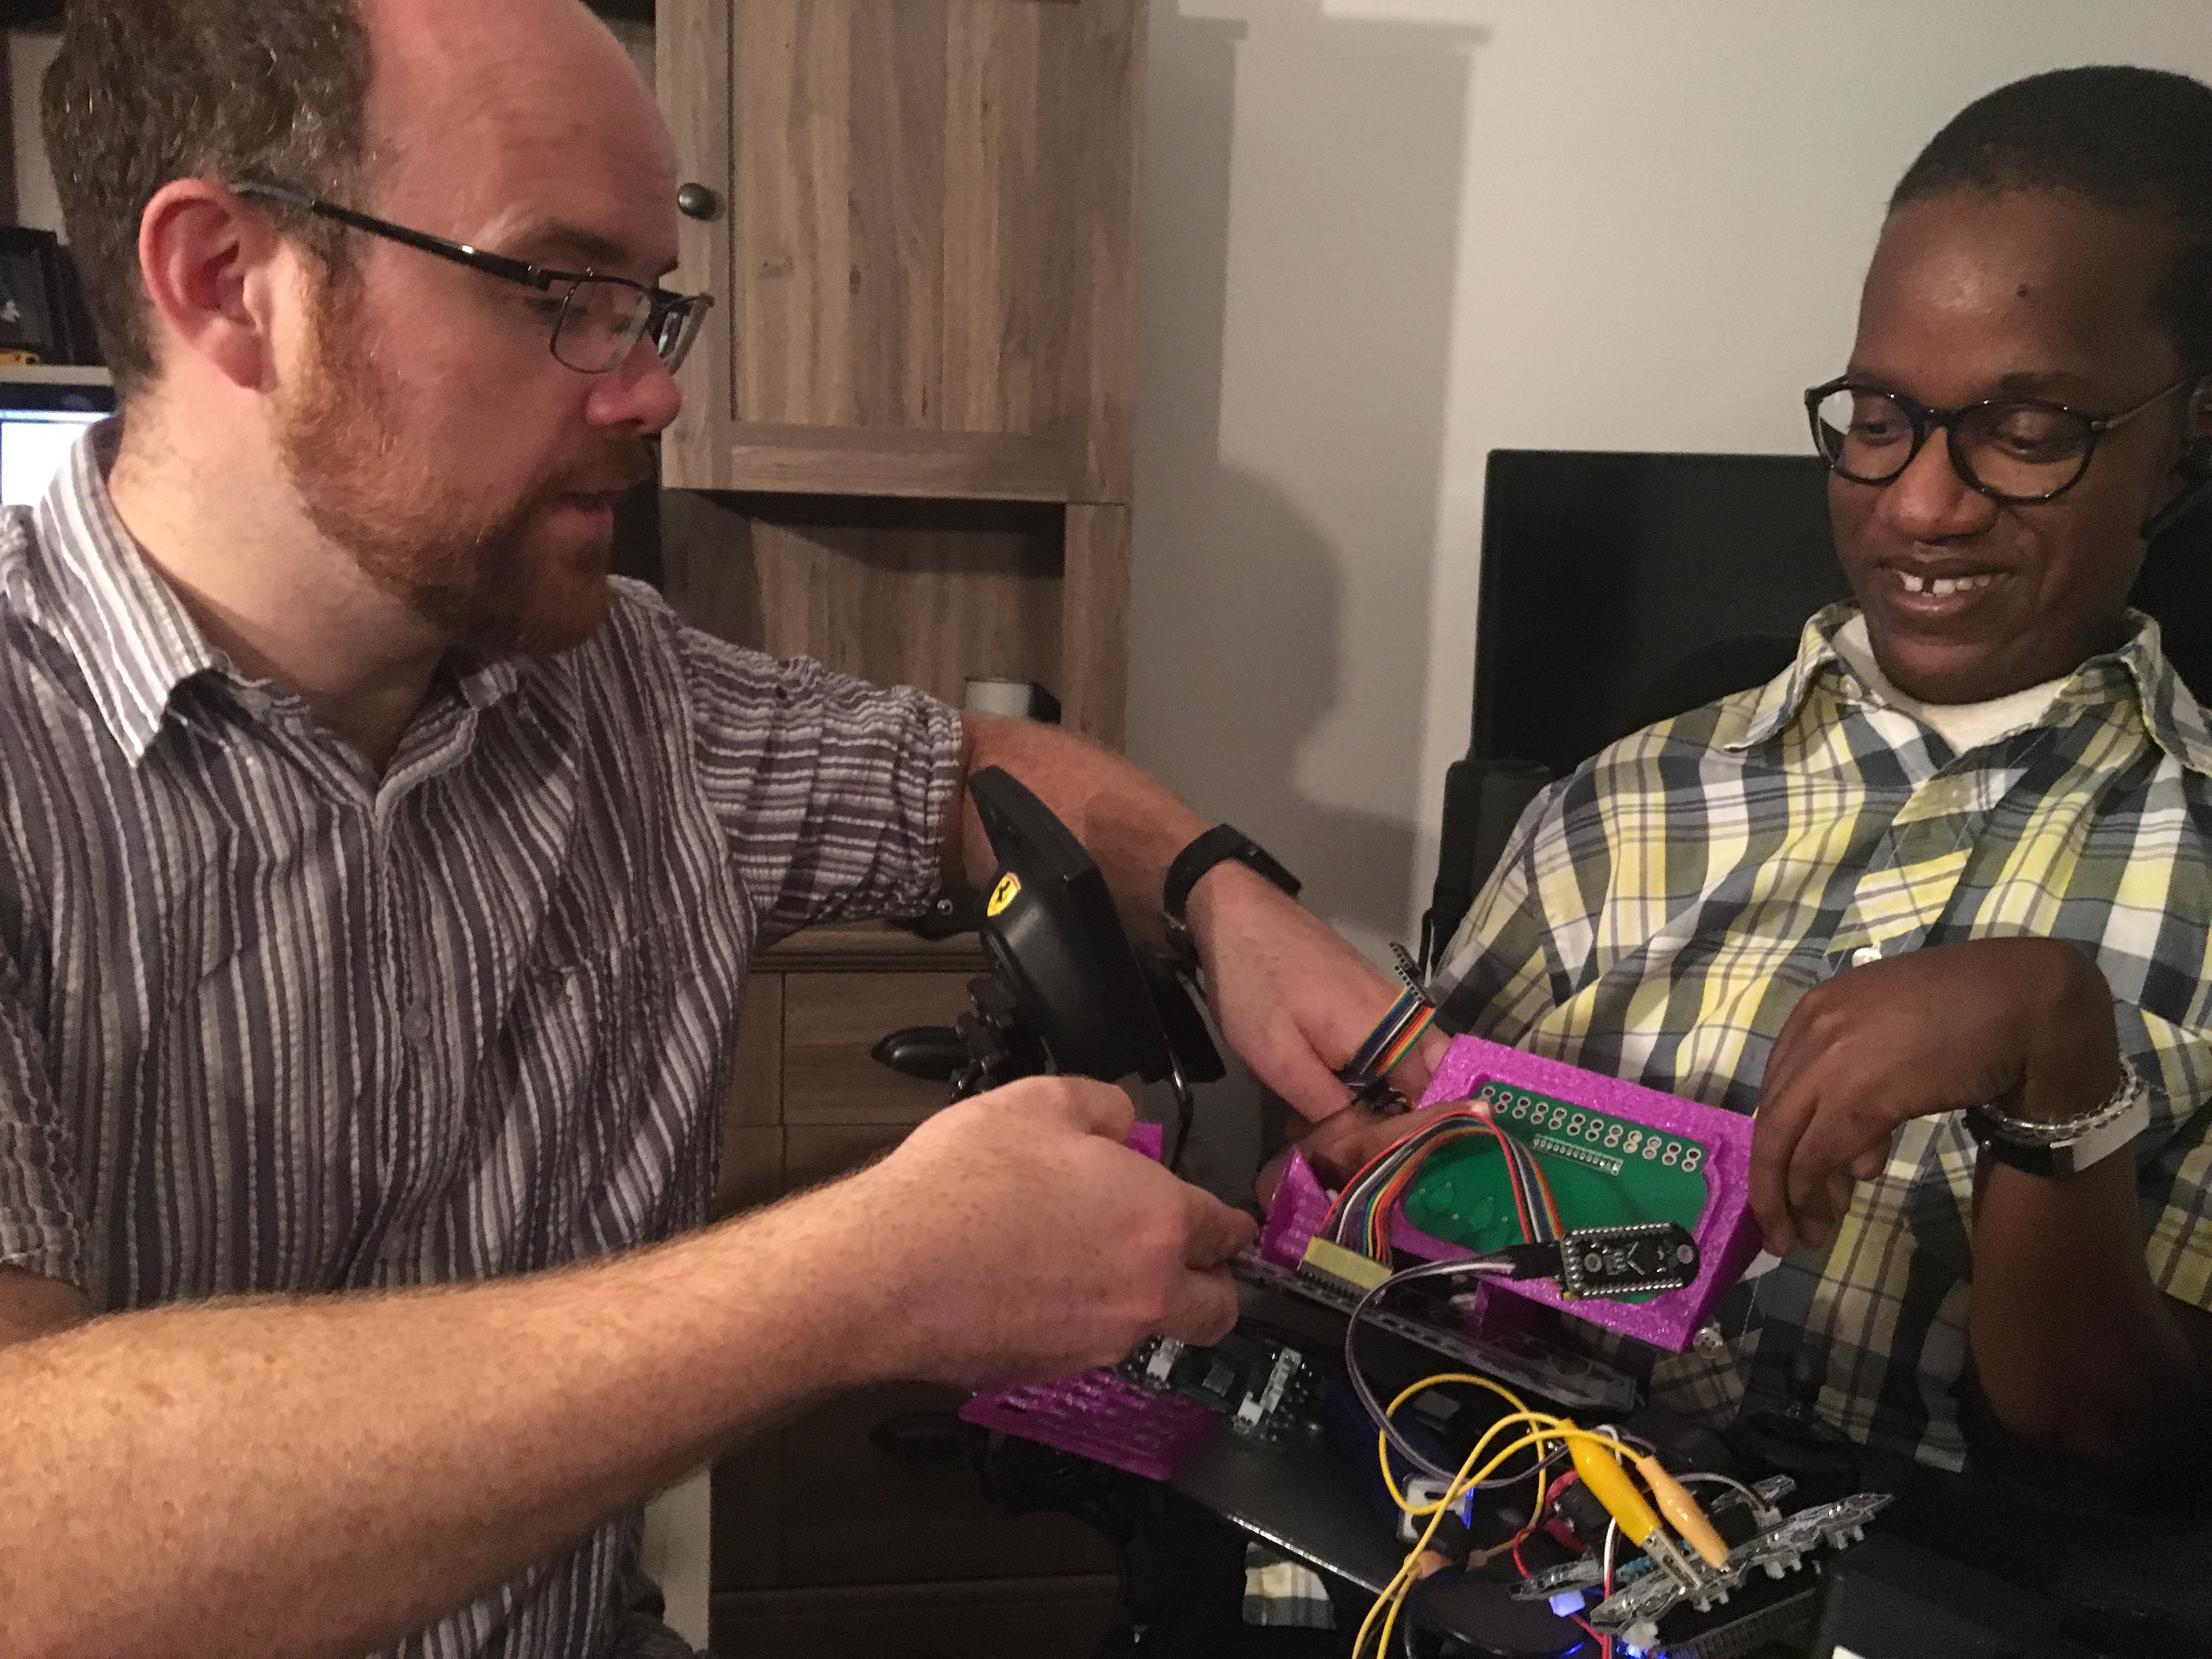 Charles and Gift holding a miniature keyboard made of 3D printed parts and a custom circuit board.